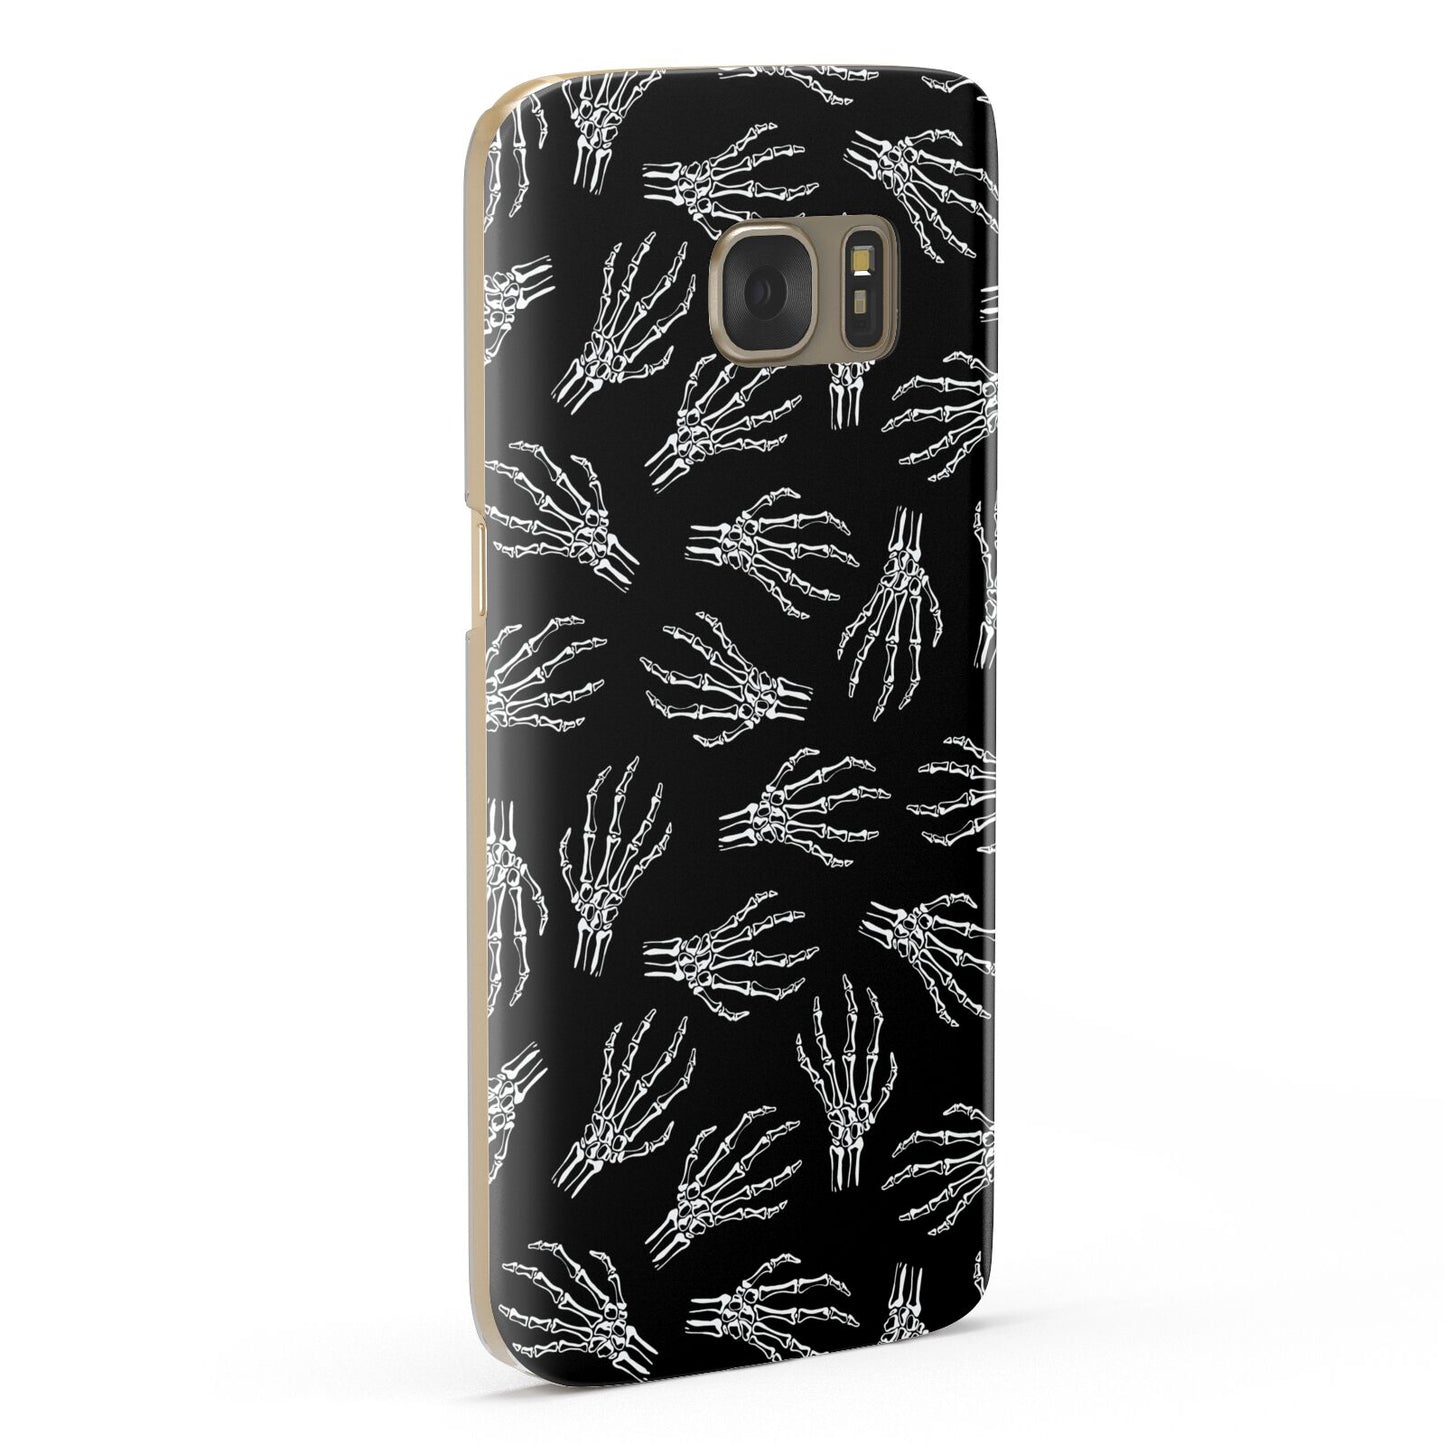 Skeleton Hands Samsung Galaxy Case Fourty Five Degrees